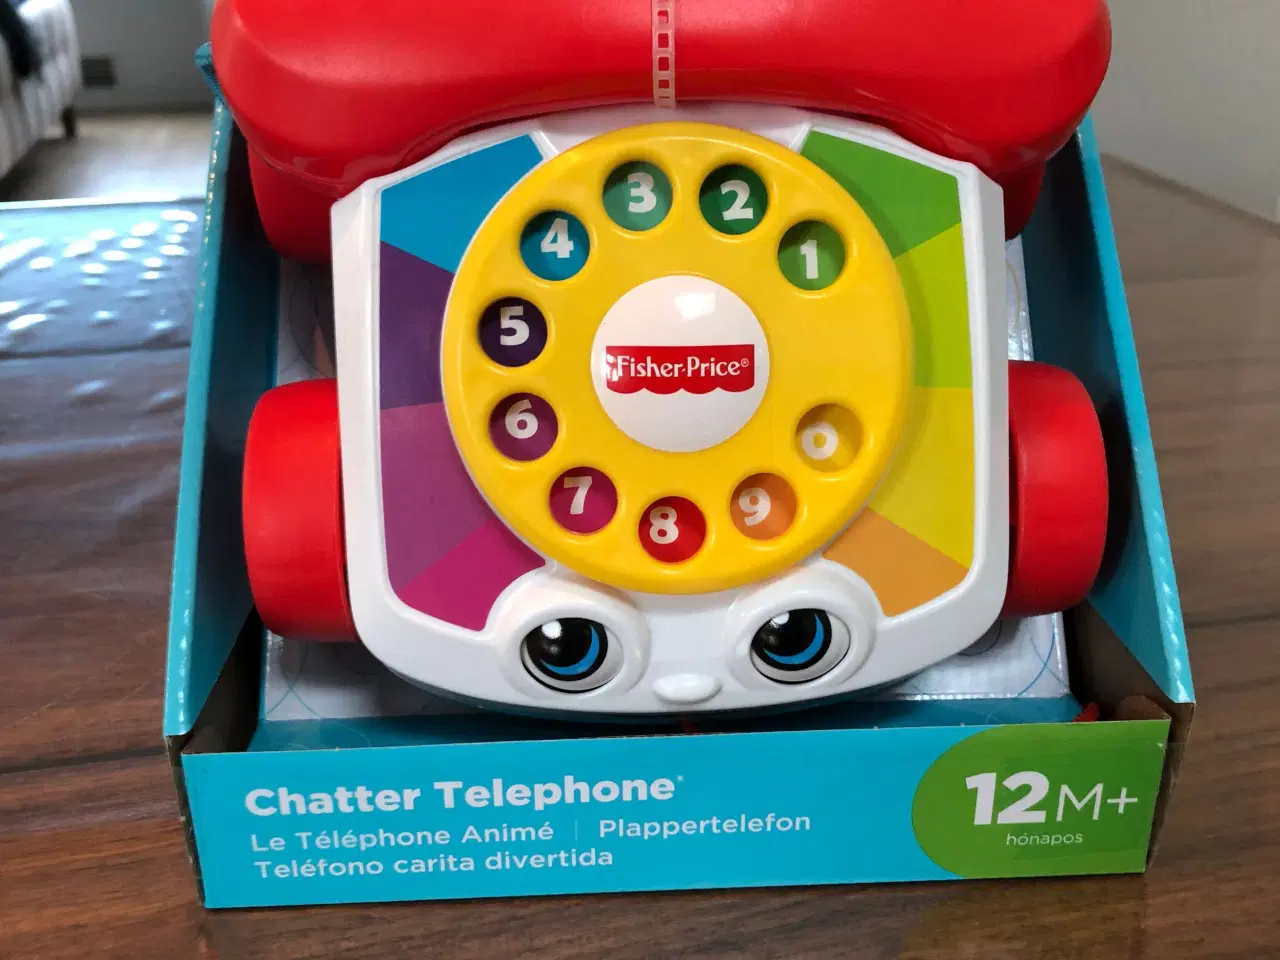 Billede 3 - Fisher Price chatter Telephone 